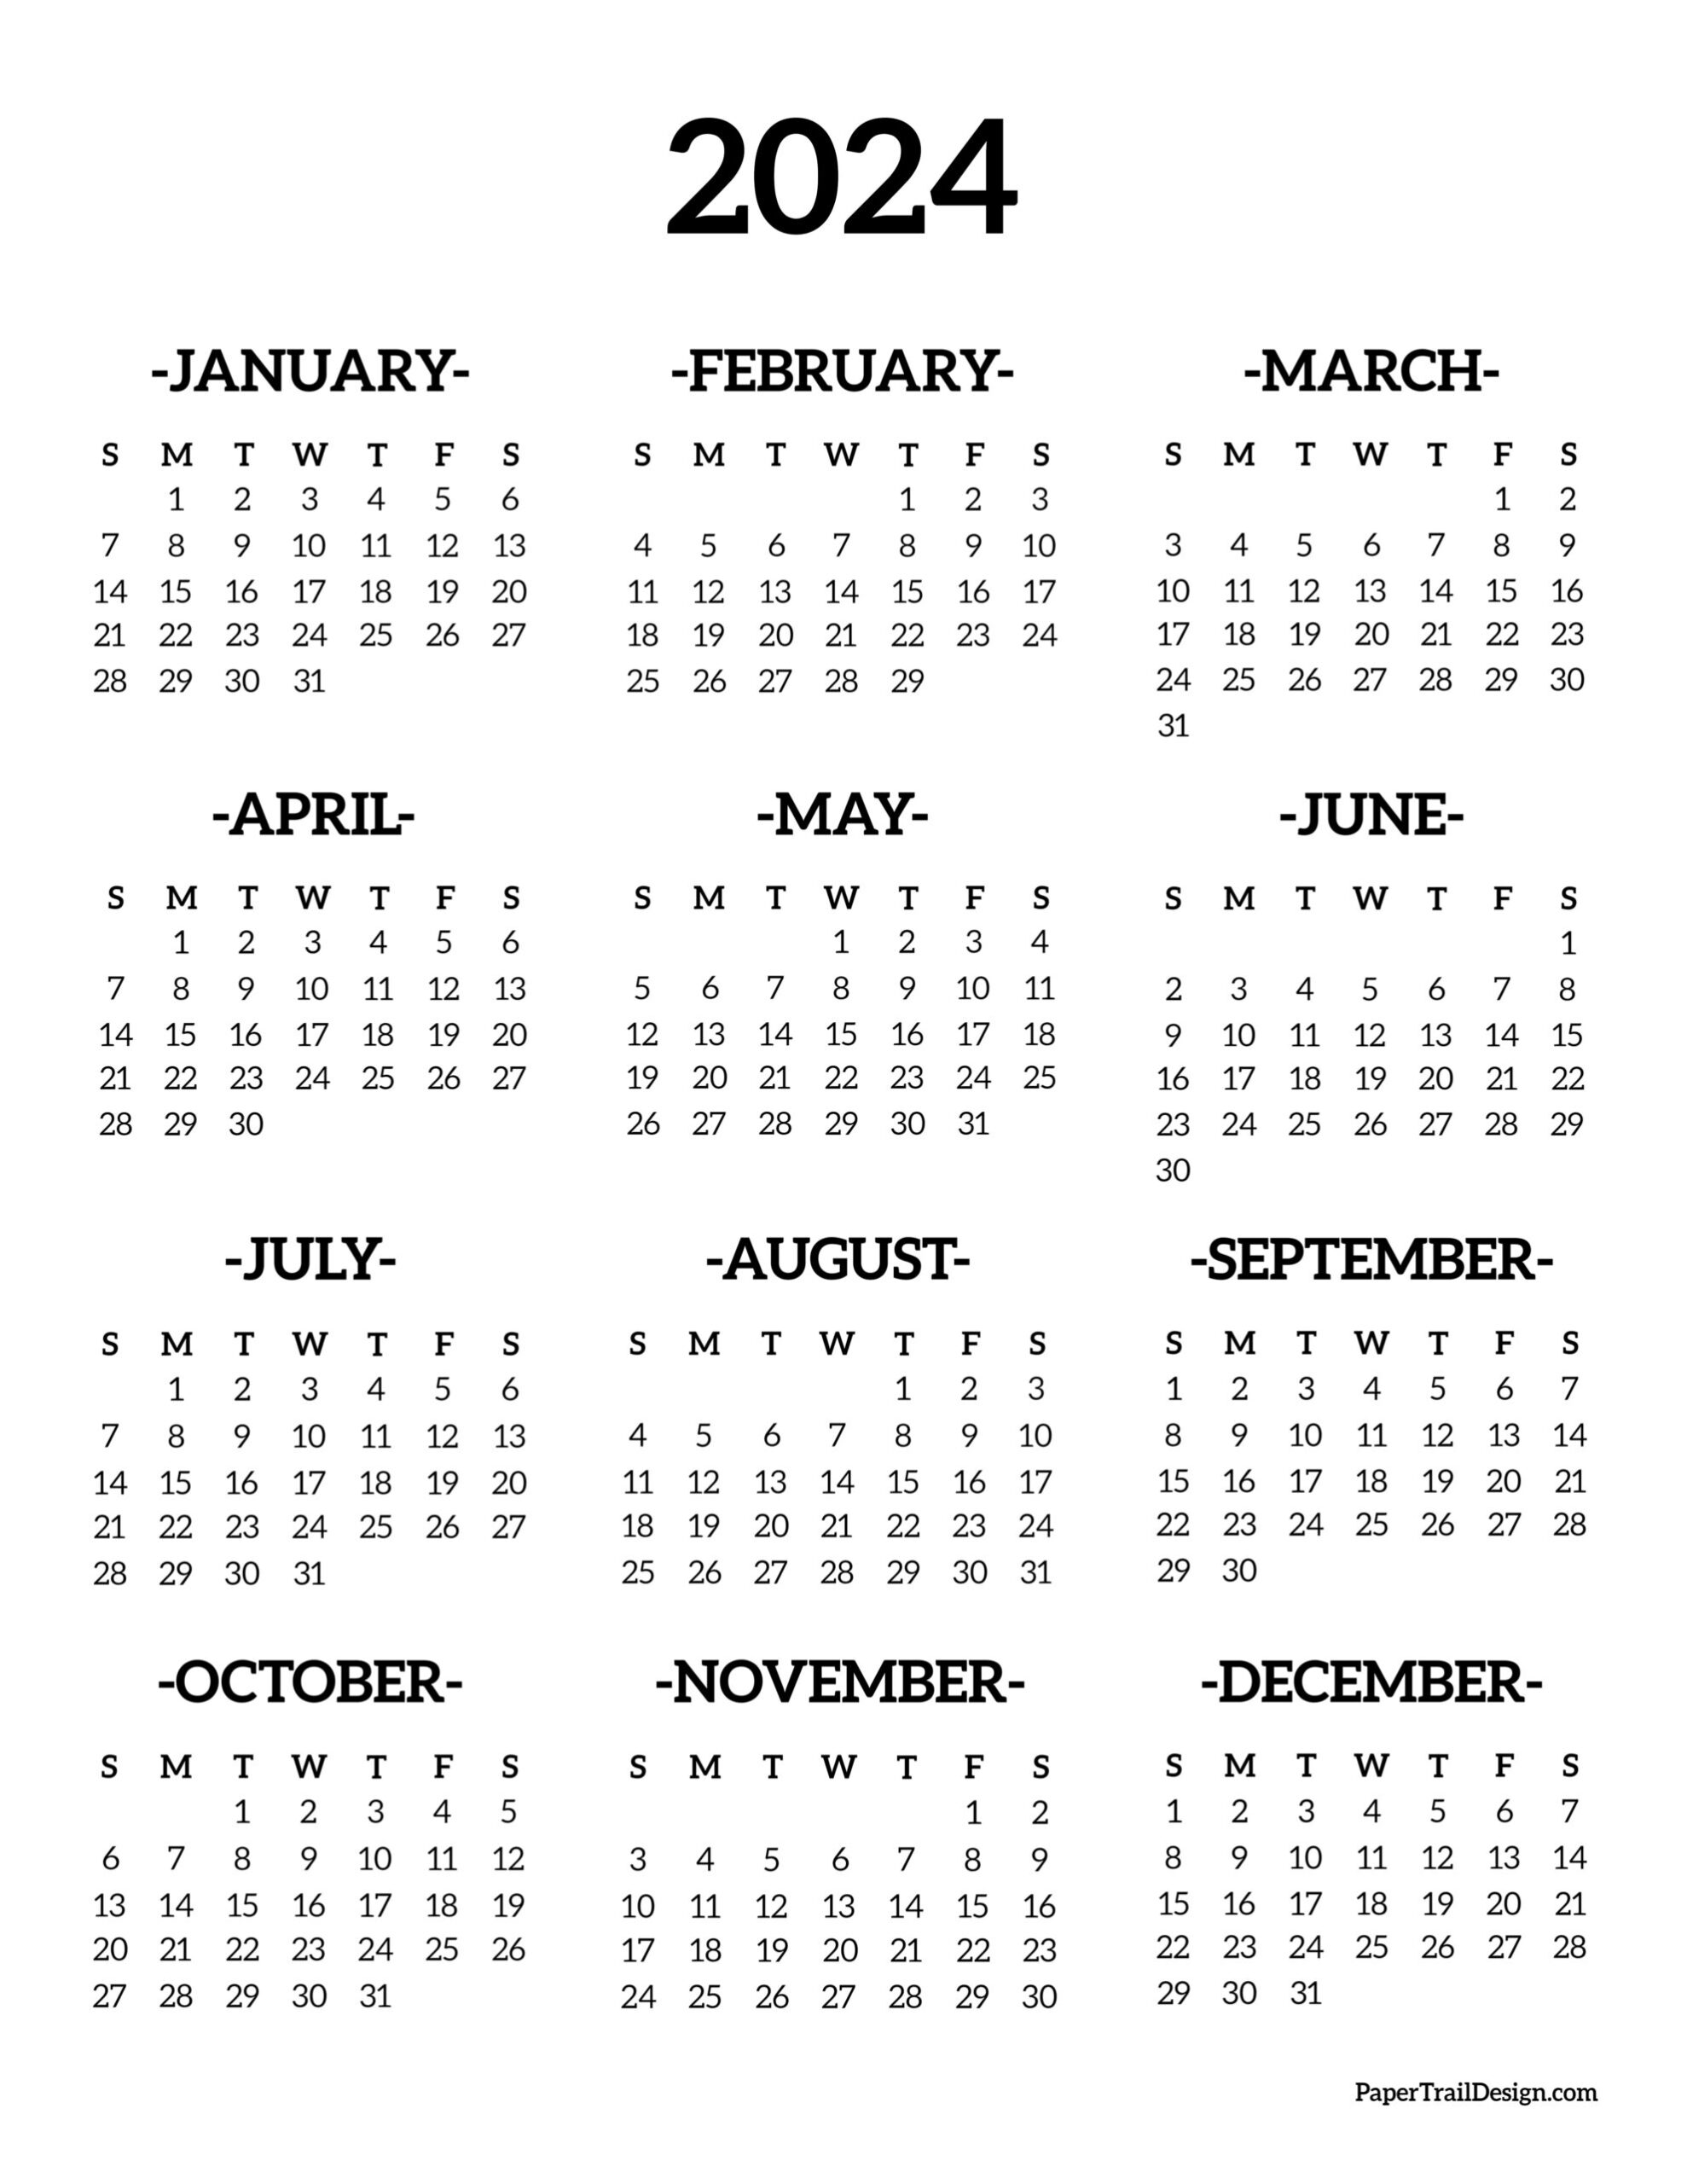 Calendar 2024 Printable One Page - Paper Trail Design for Calendar For 2024 Free Printable